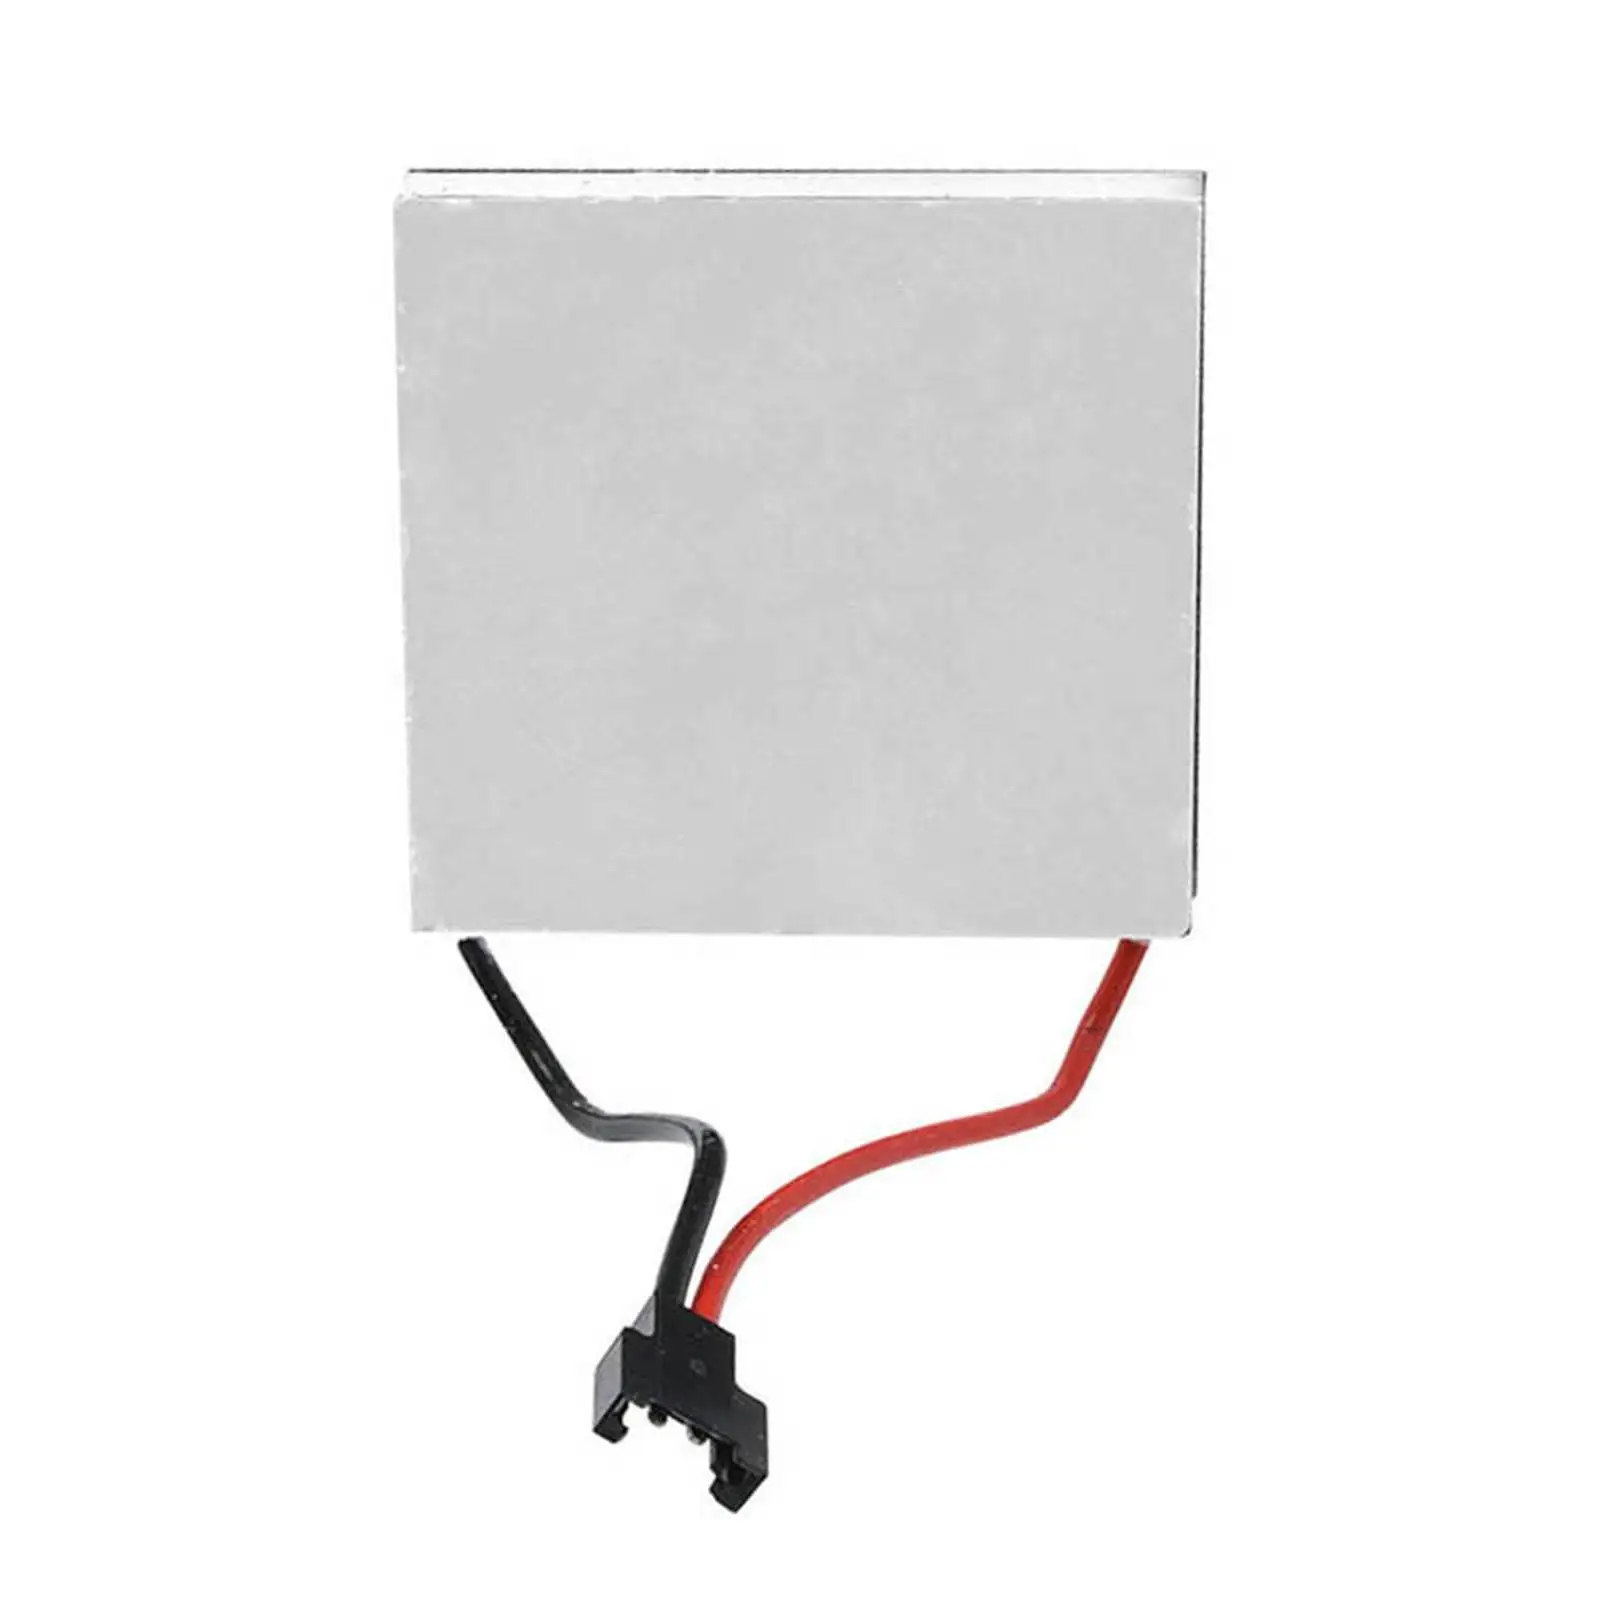 Fireplace Fan Motor SImple to Use Heat Powered Stove Fan Motor for Attachment